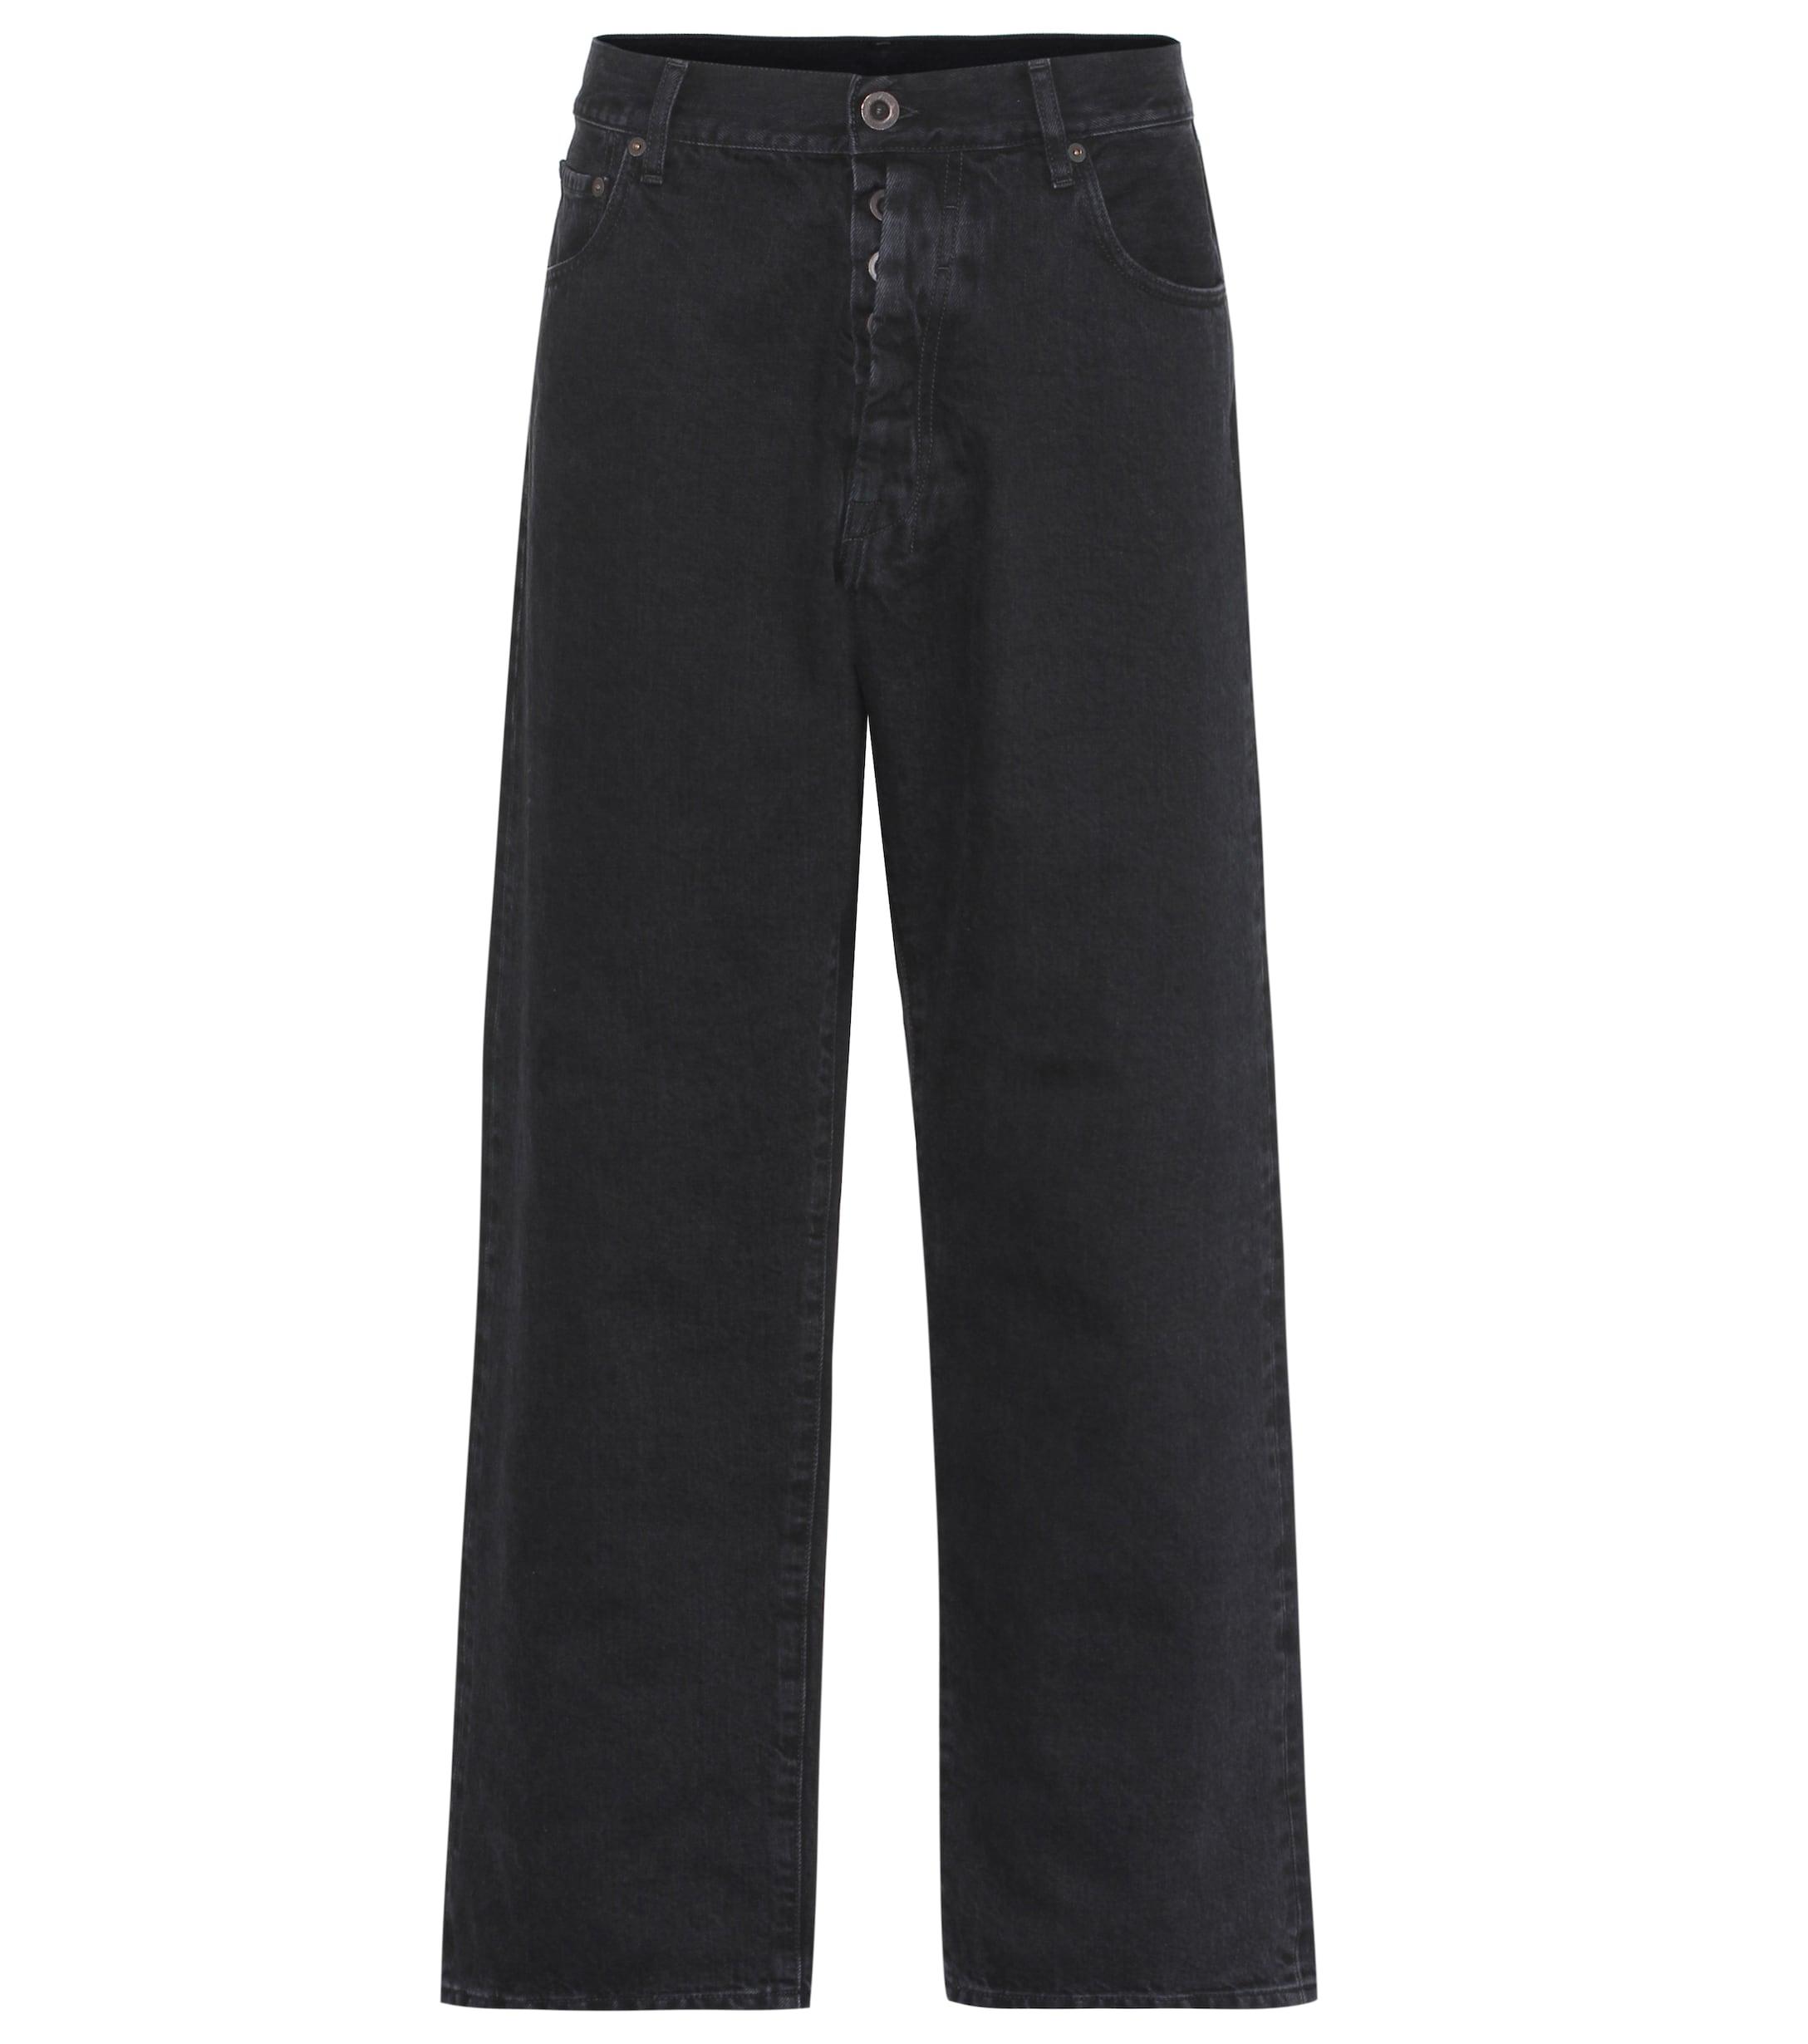 Unravel Project Denim Baggy Boy Jeans in Black - Lyst